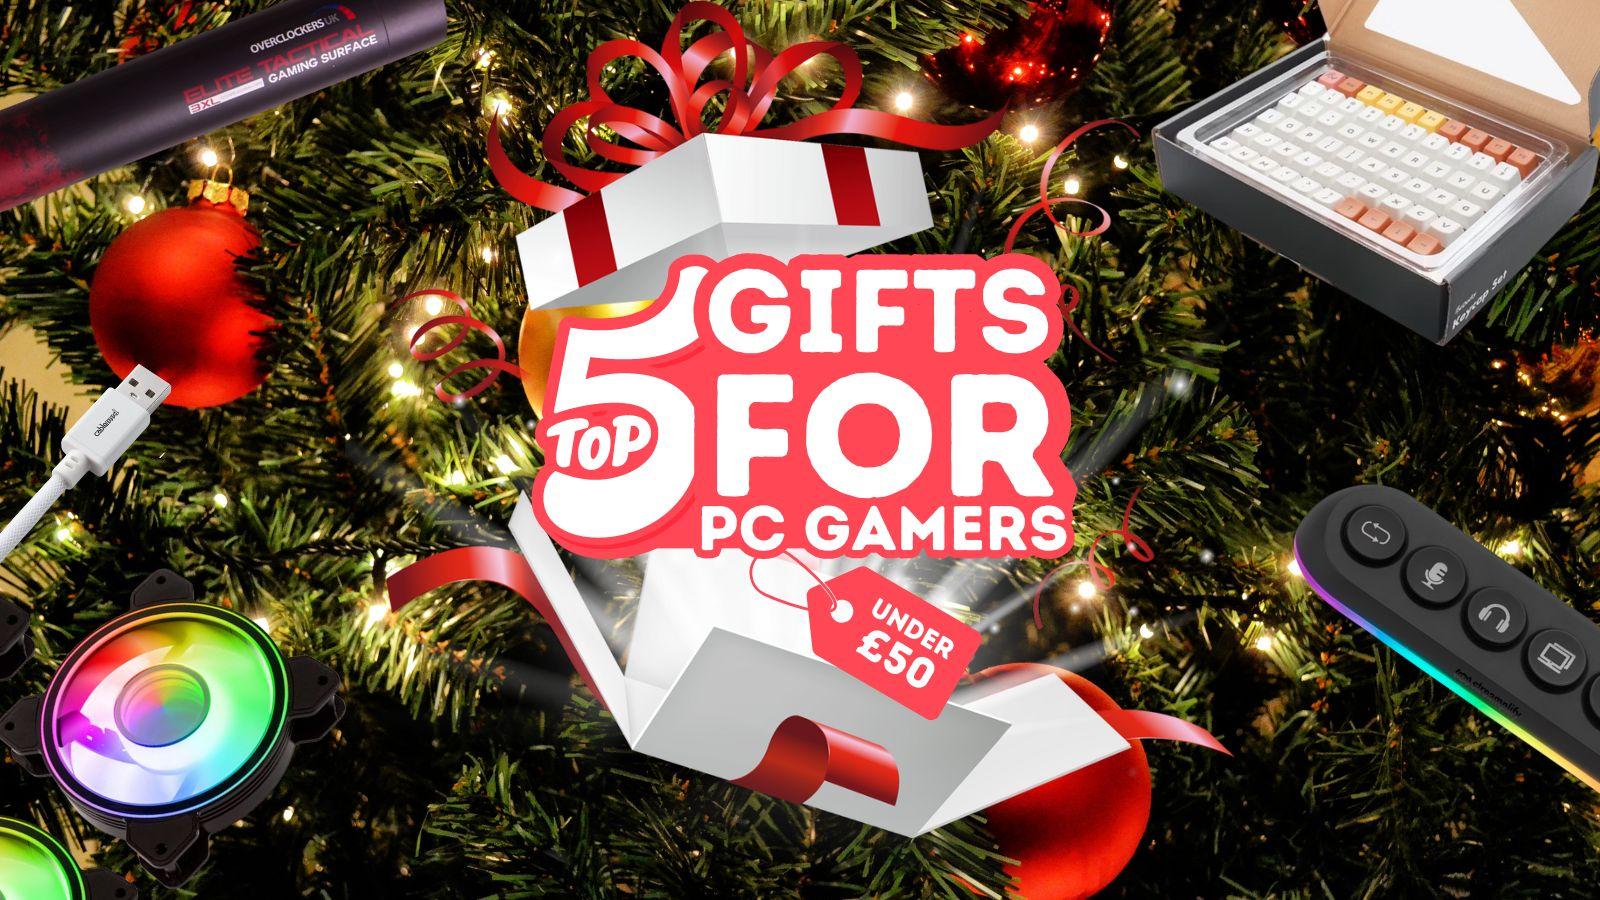 Top 5 Gifts for PC Gamers Under £50